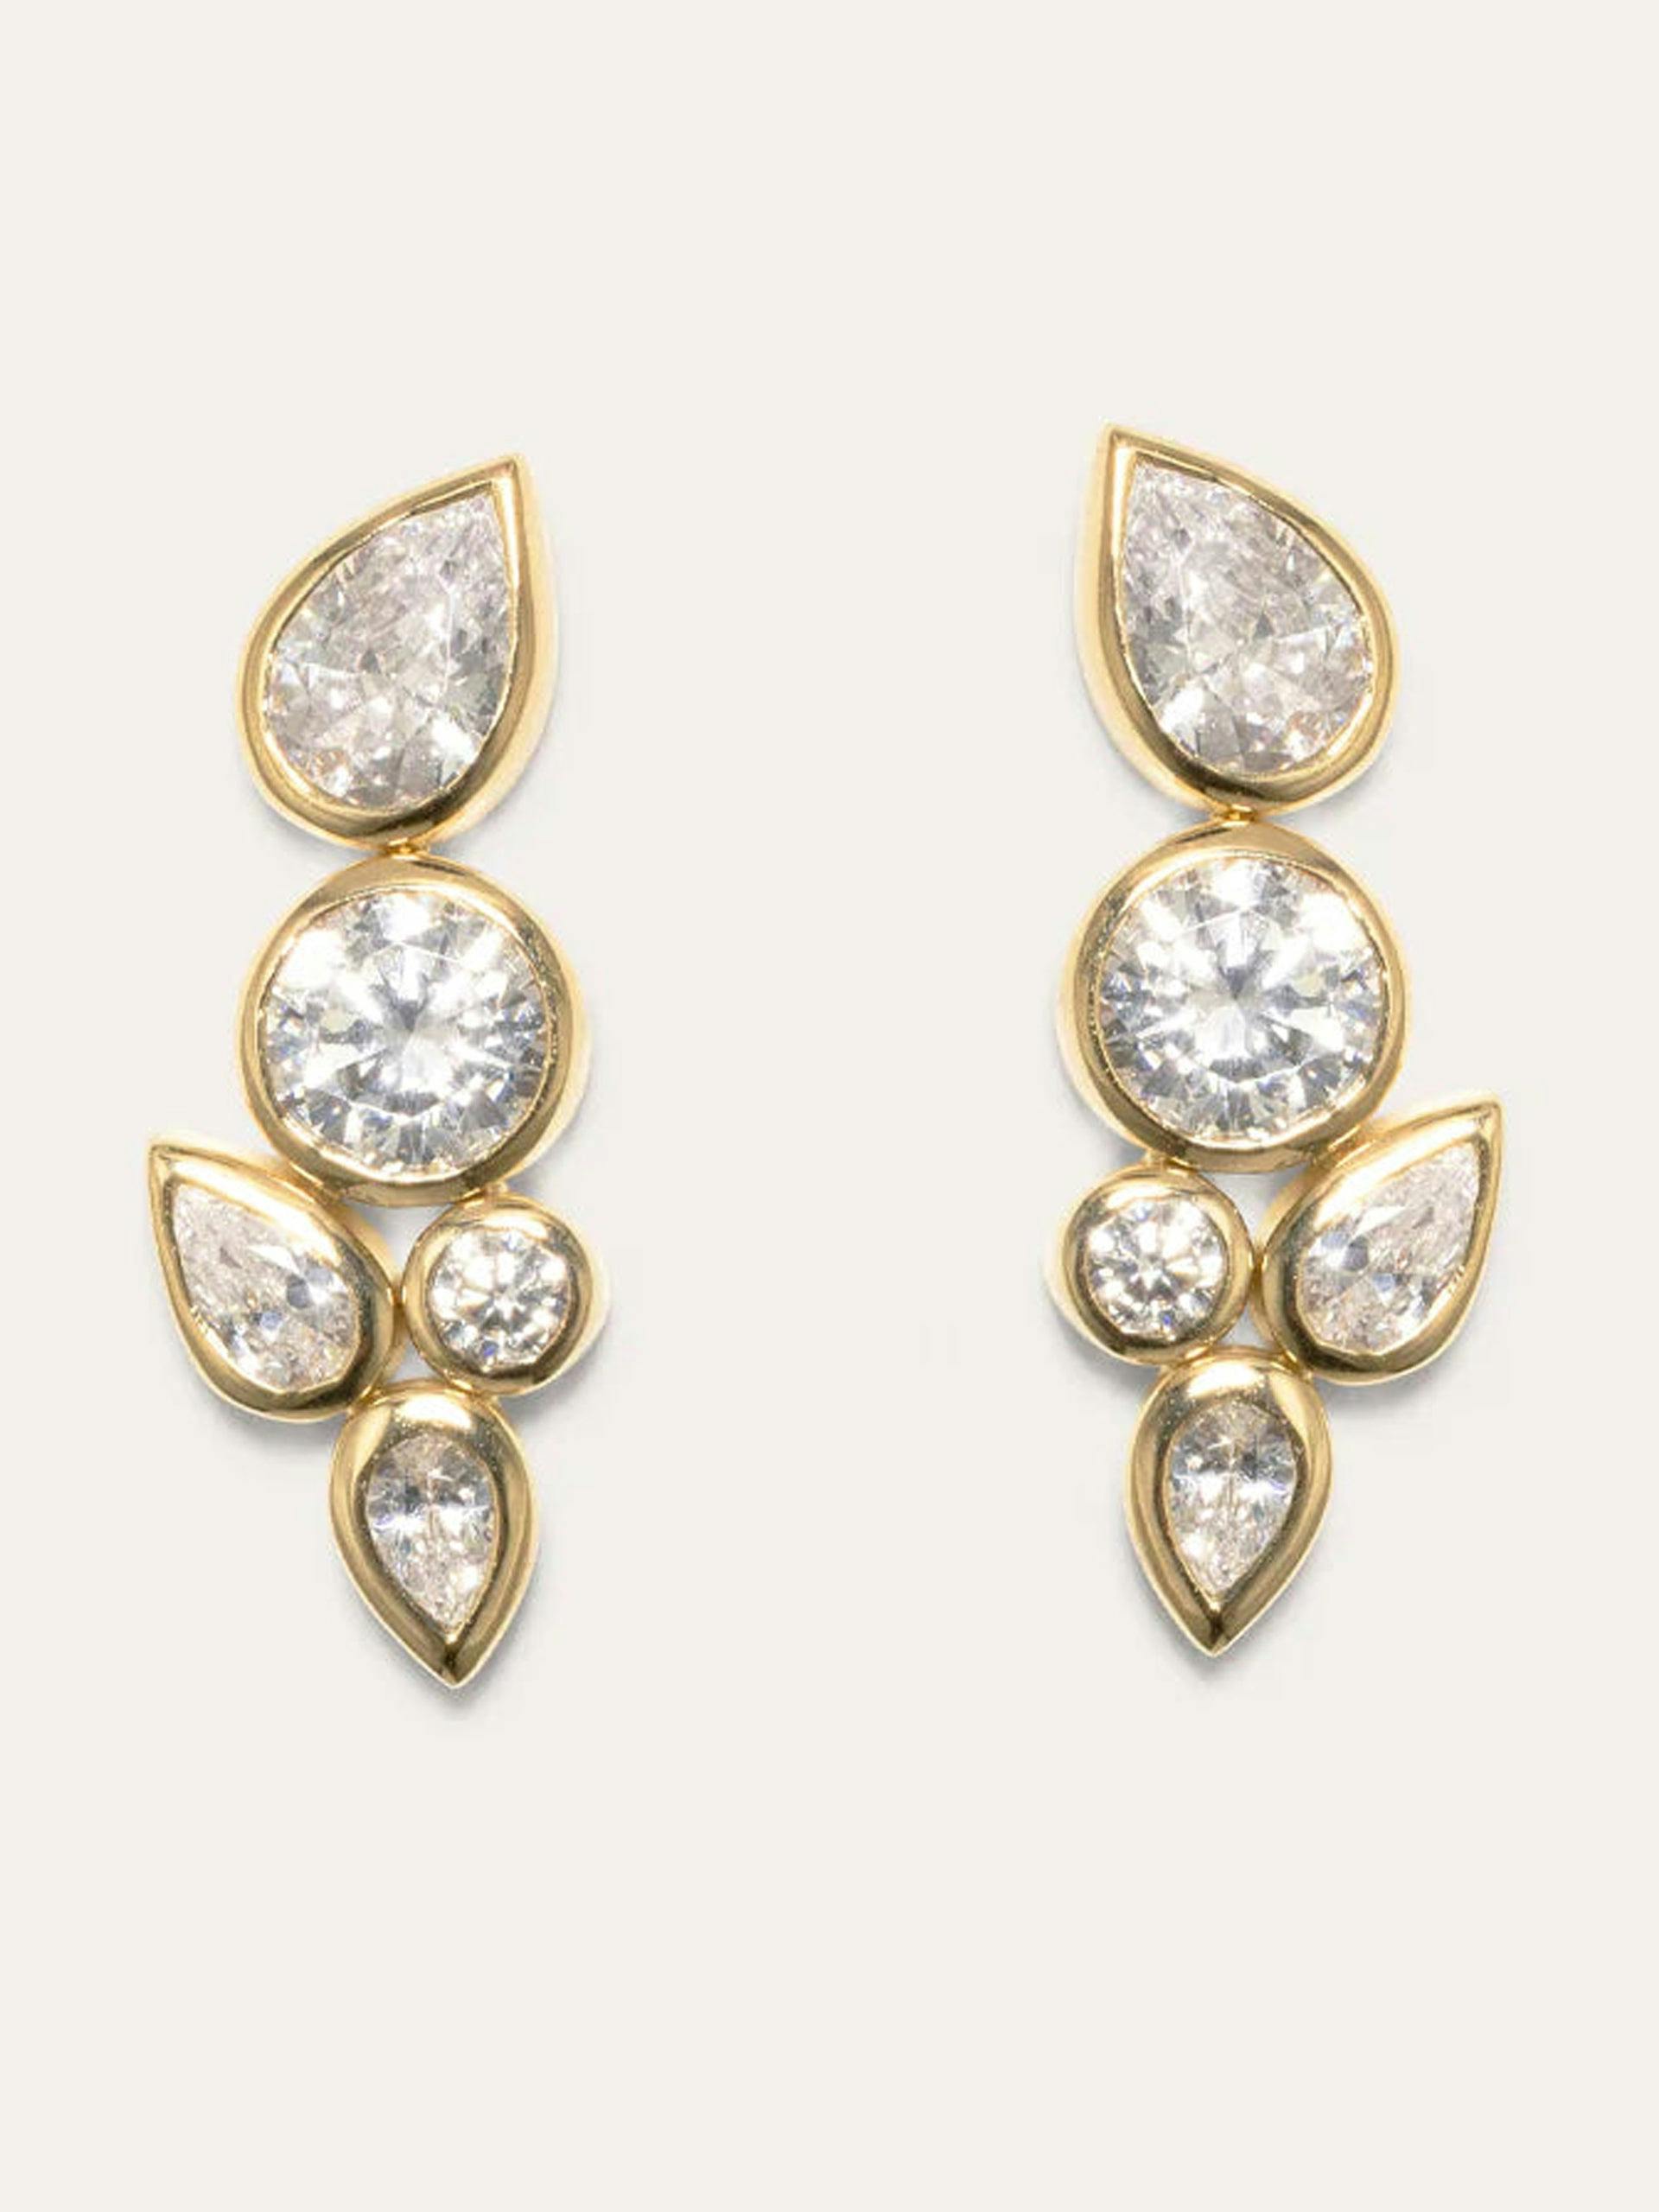 "Like Peas in a Pod" cubic zirconia and gold vermeil earrings